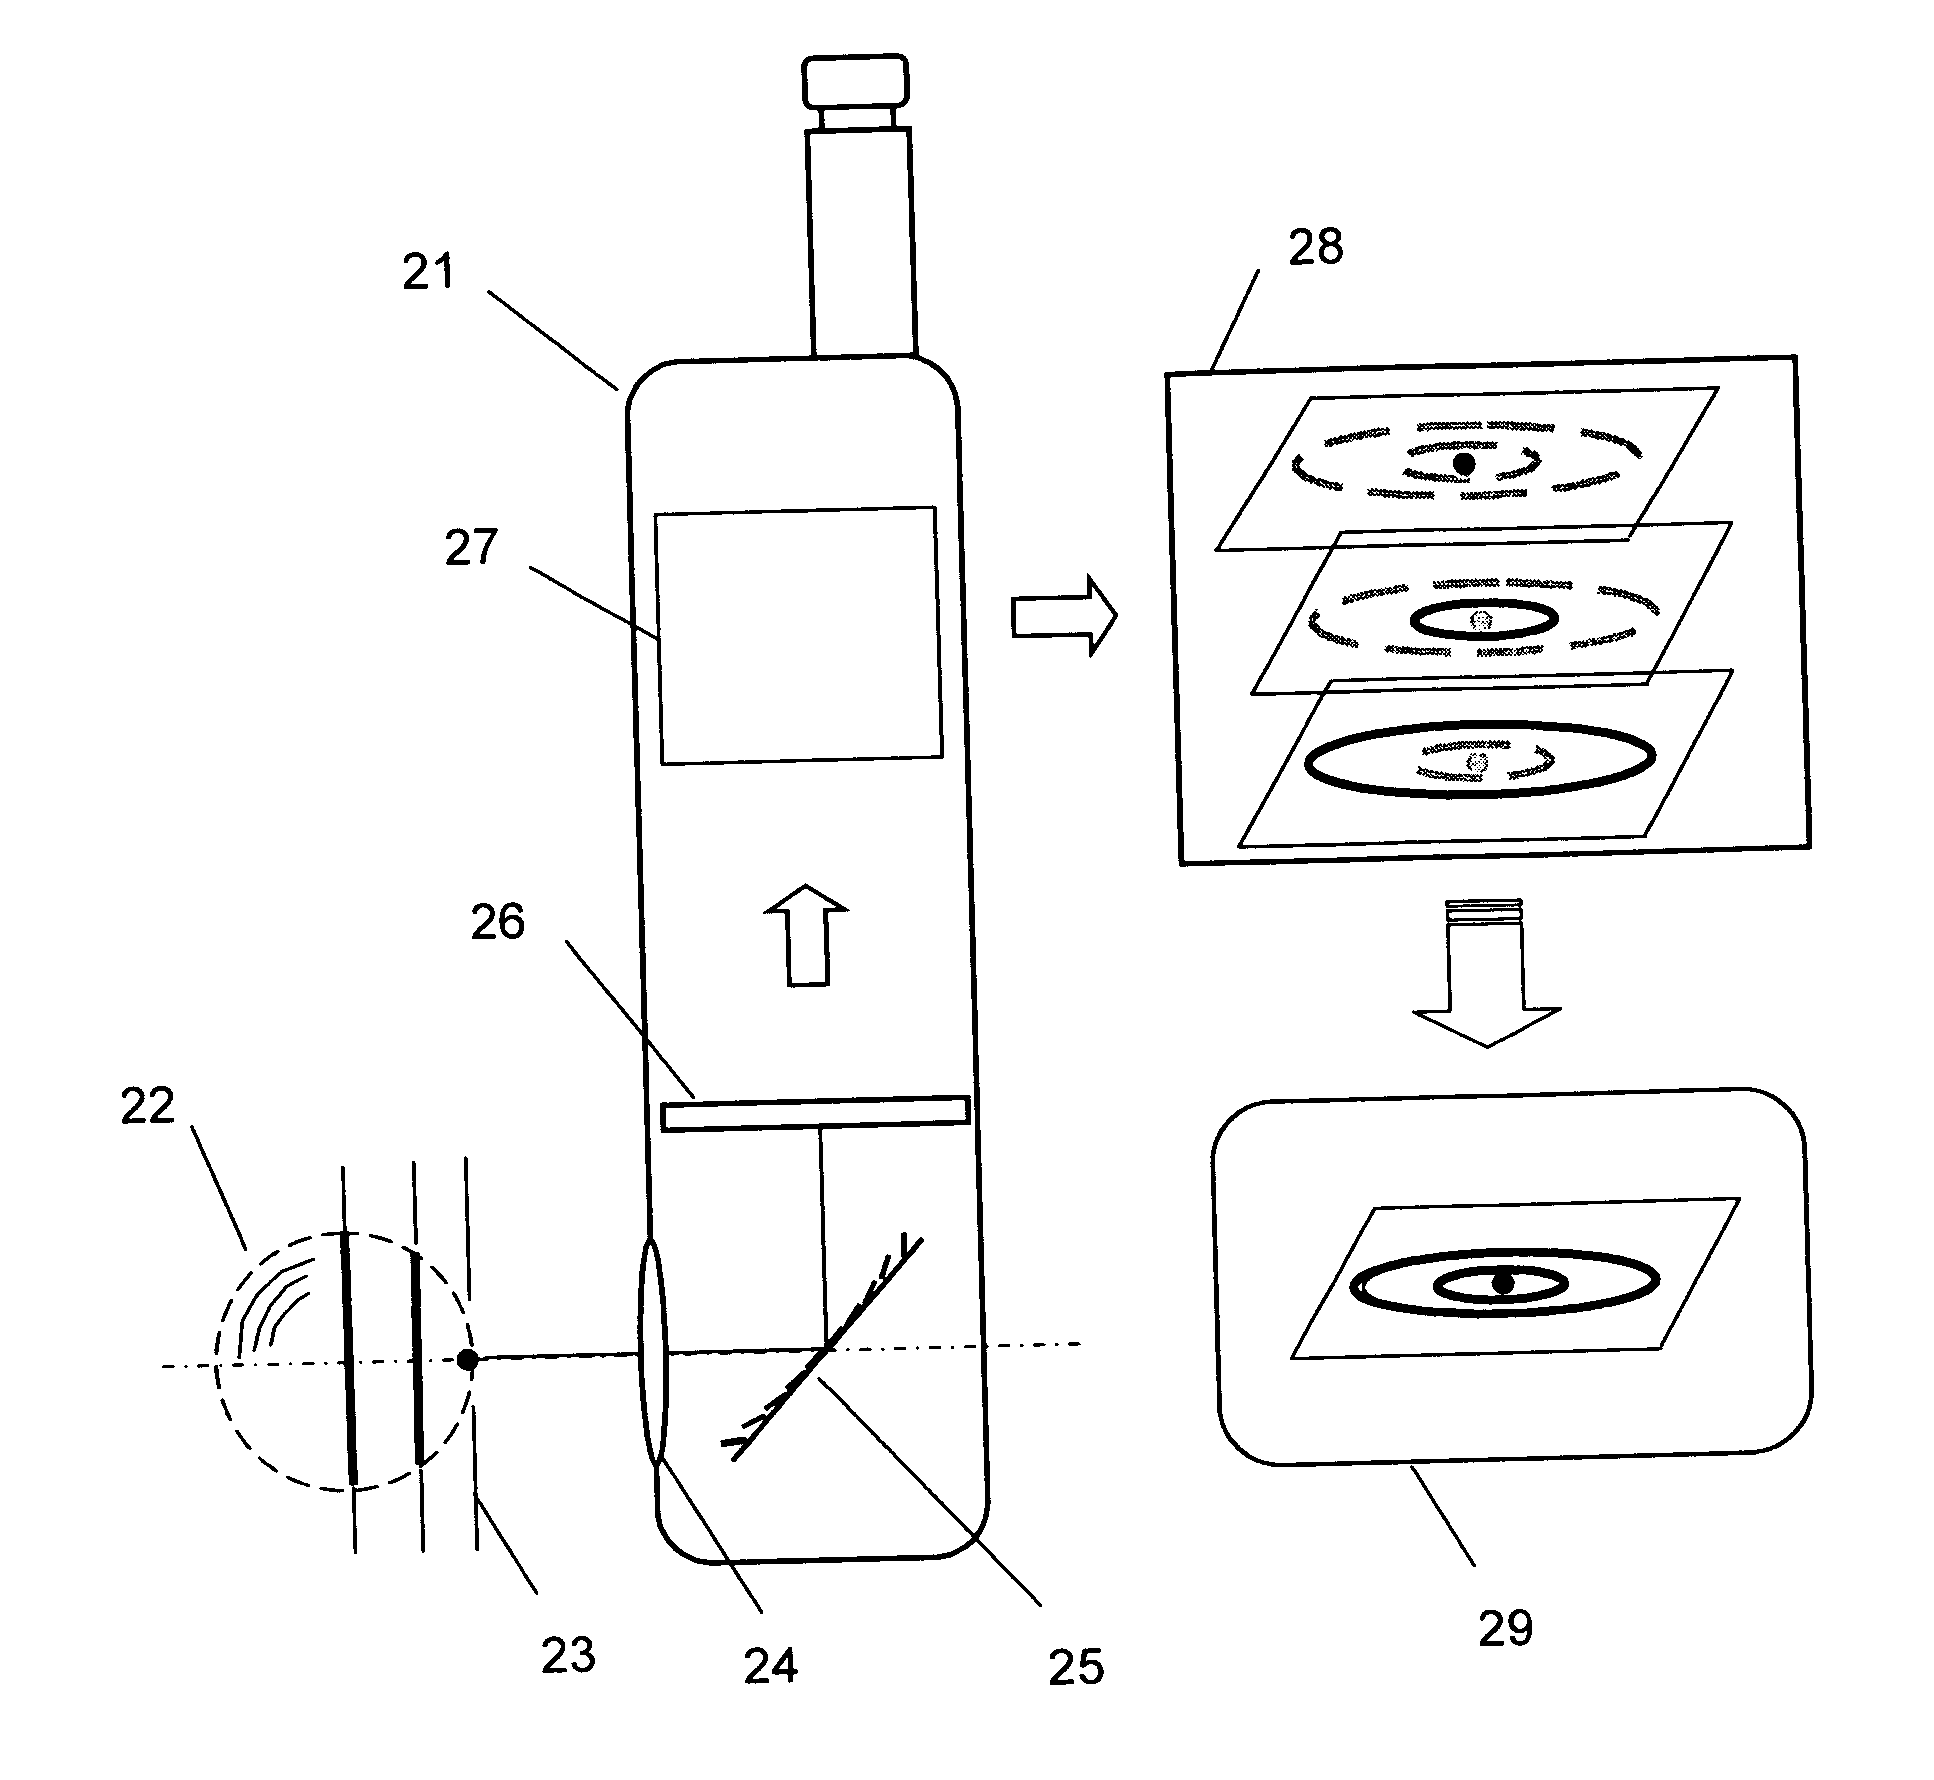 Cellular phone camera with three-dimensional imaging function